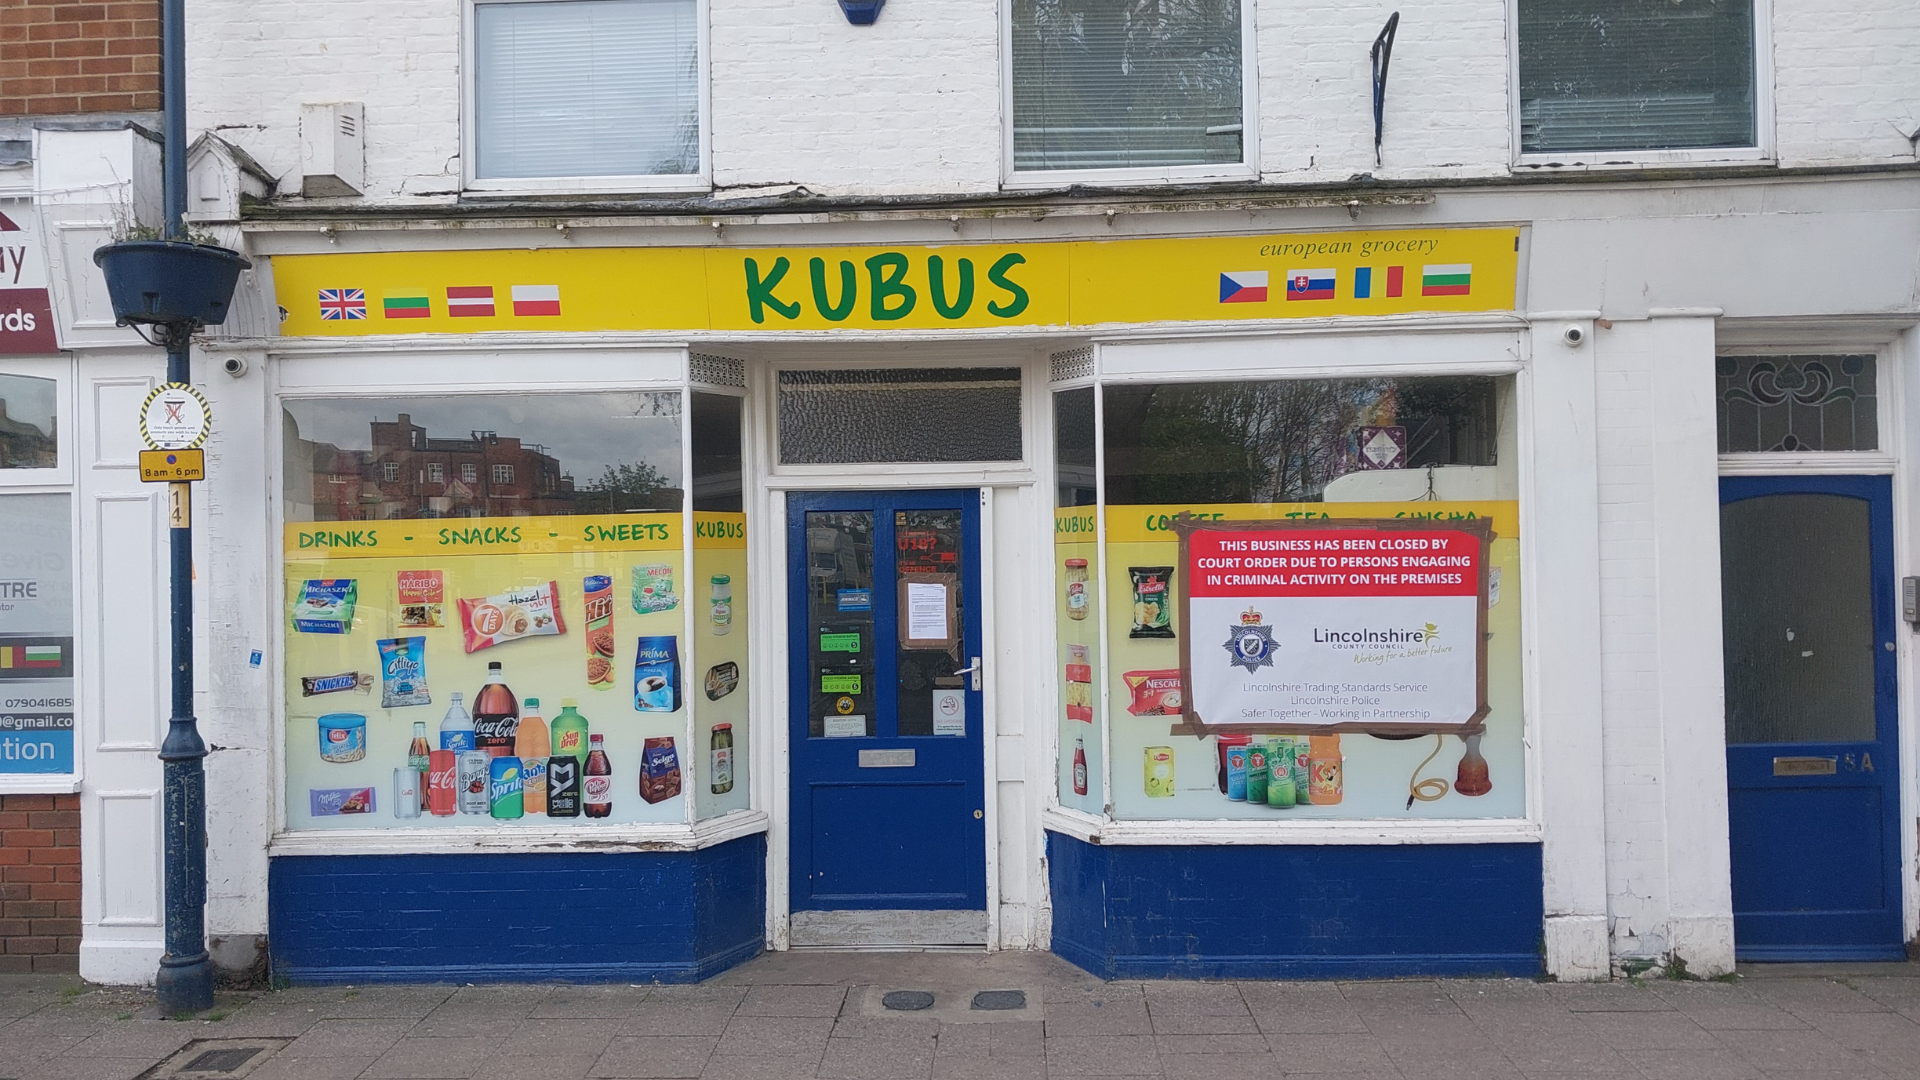 A European convenience store closed called Kubus